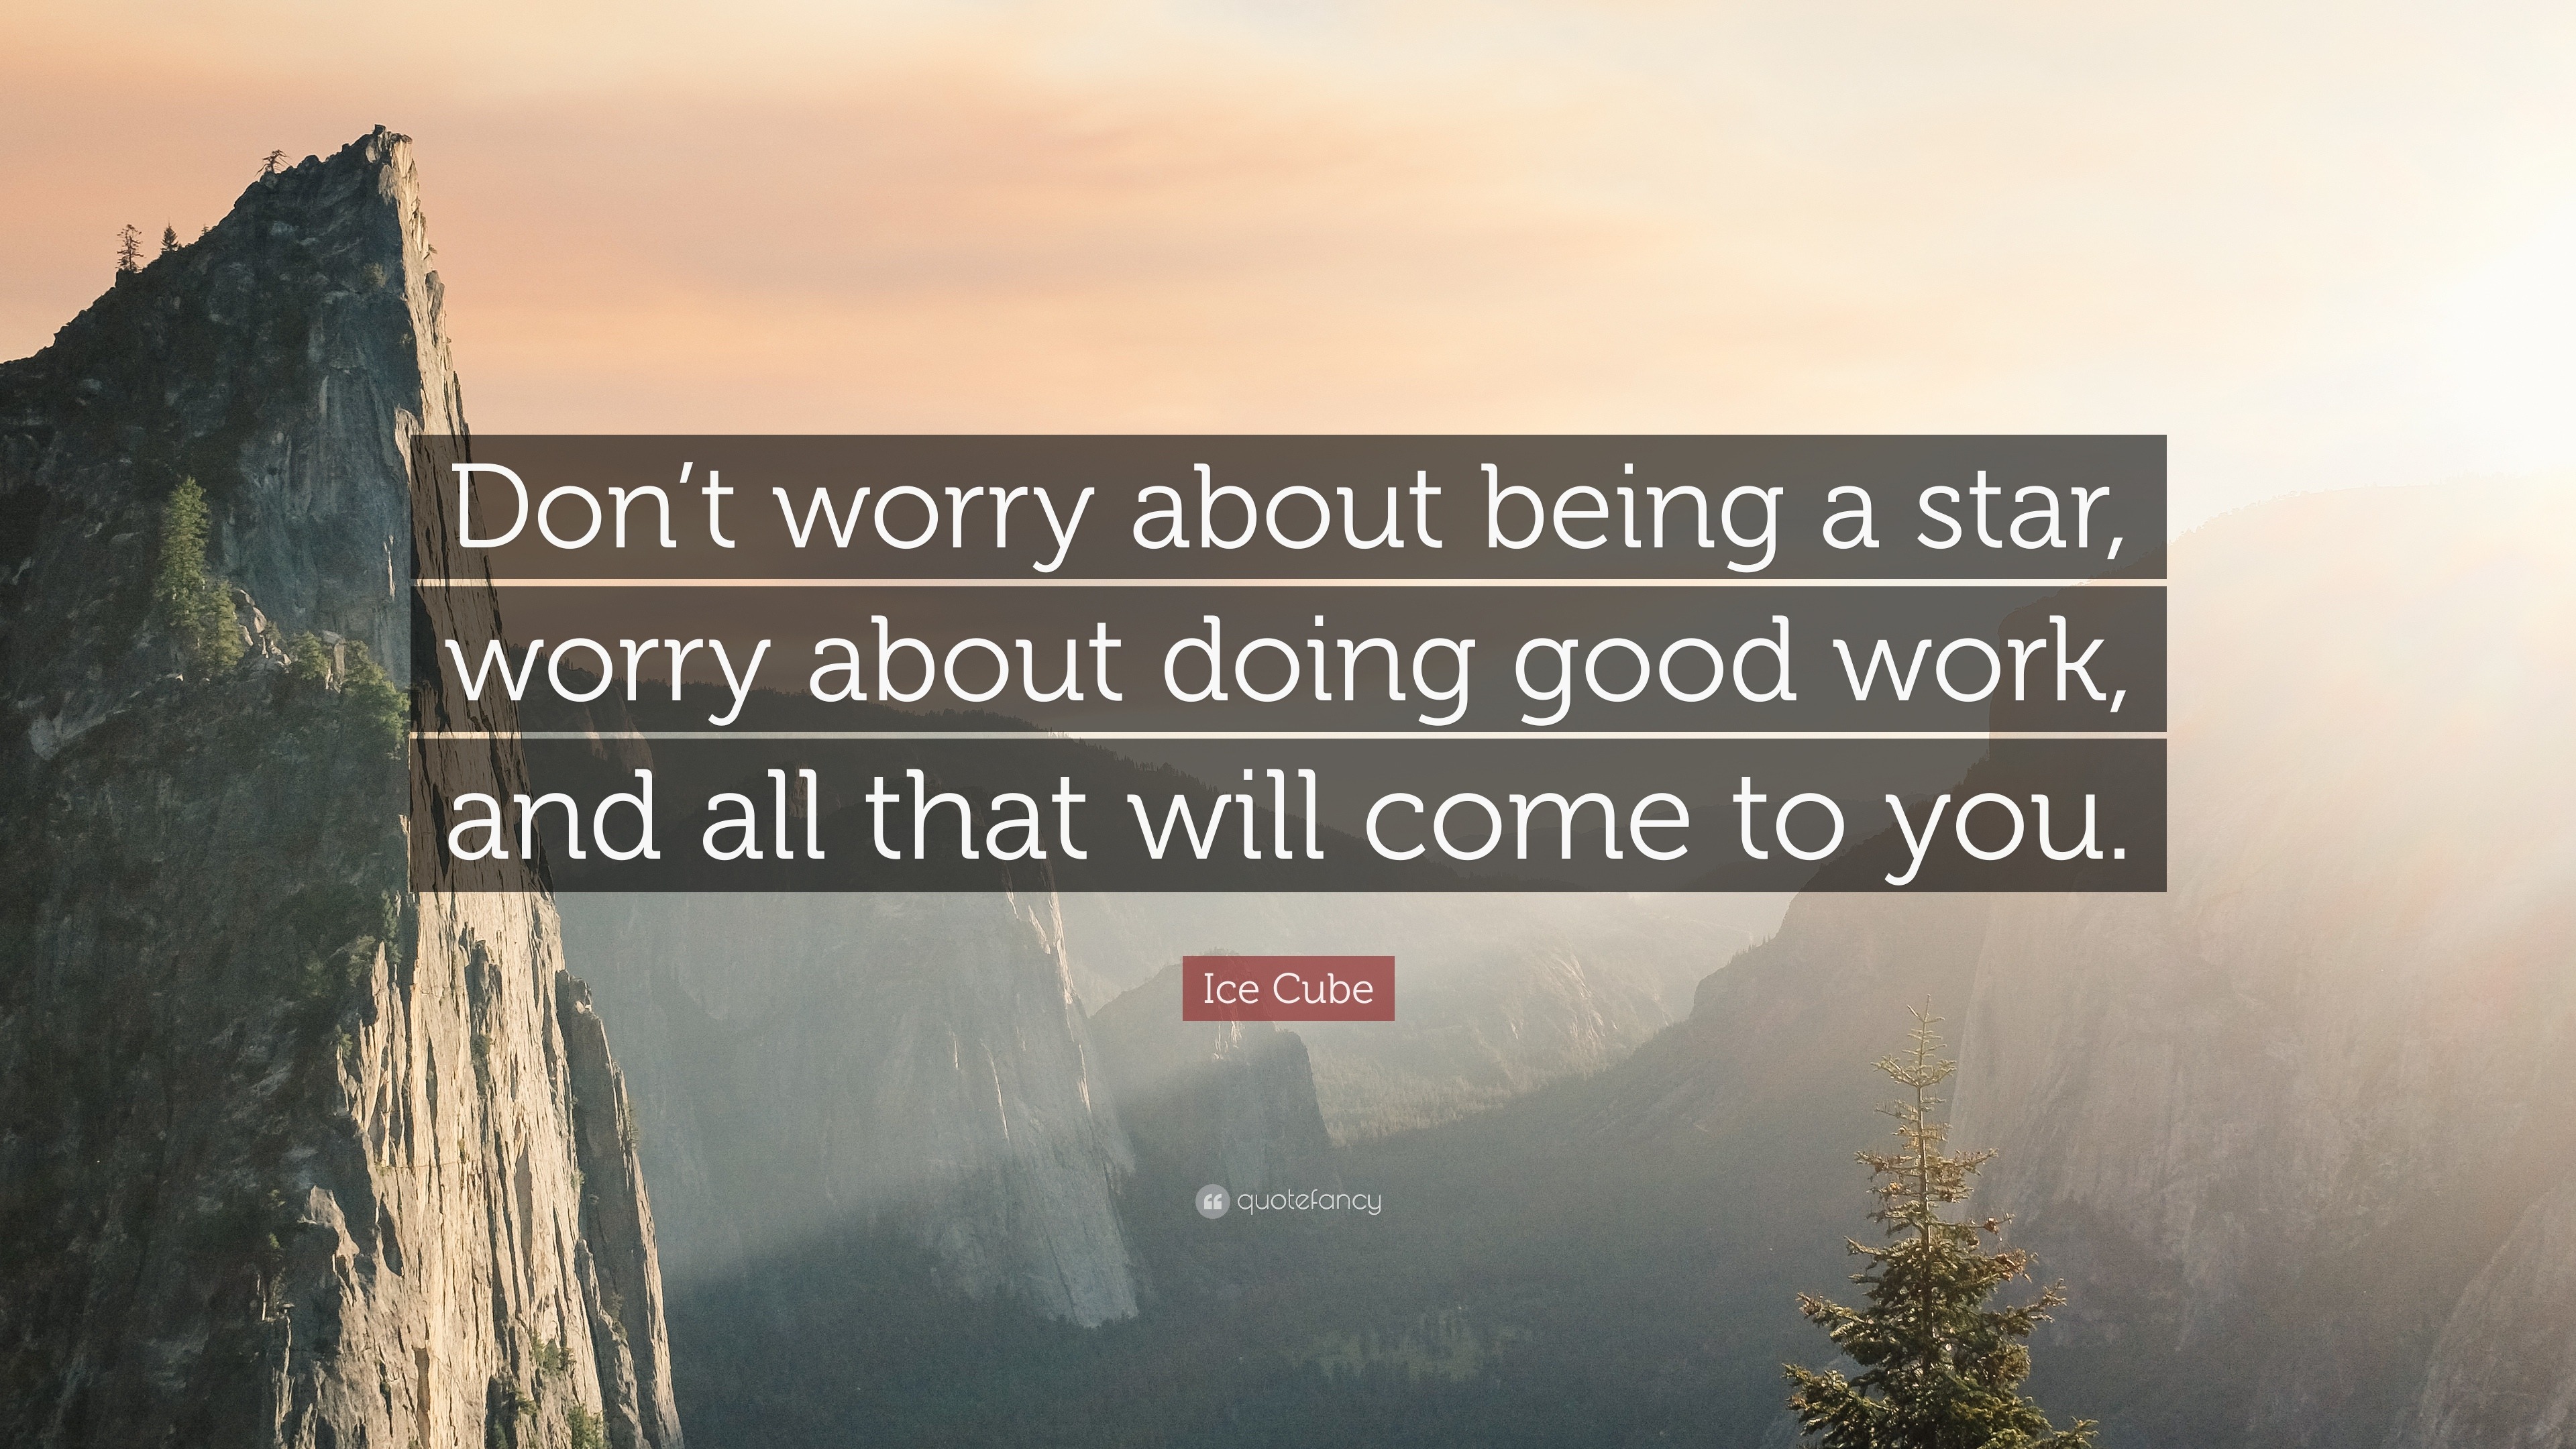 Ice Cube Quote: “Don’t worry about being a star, worry about doing good